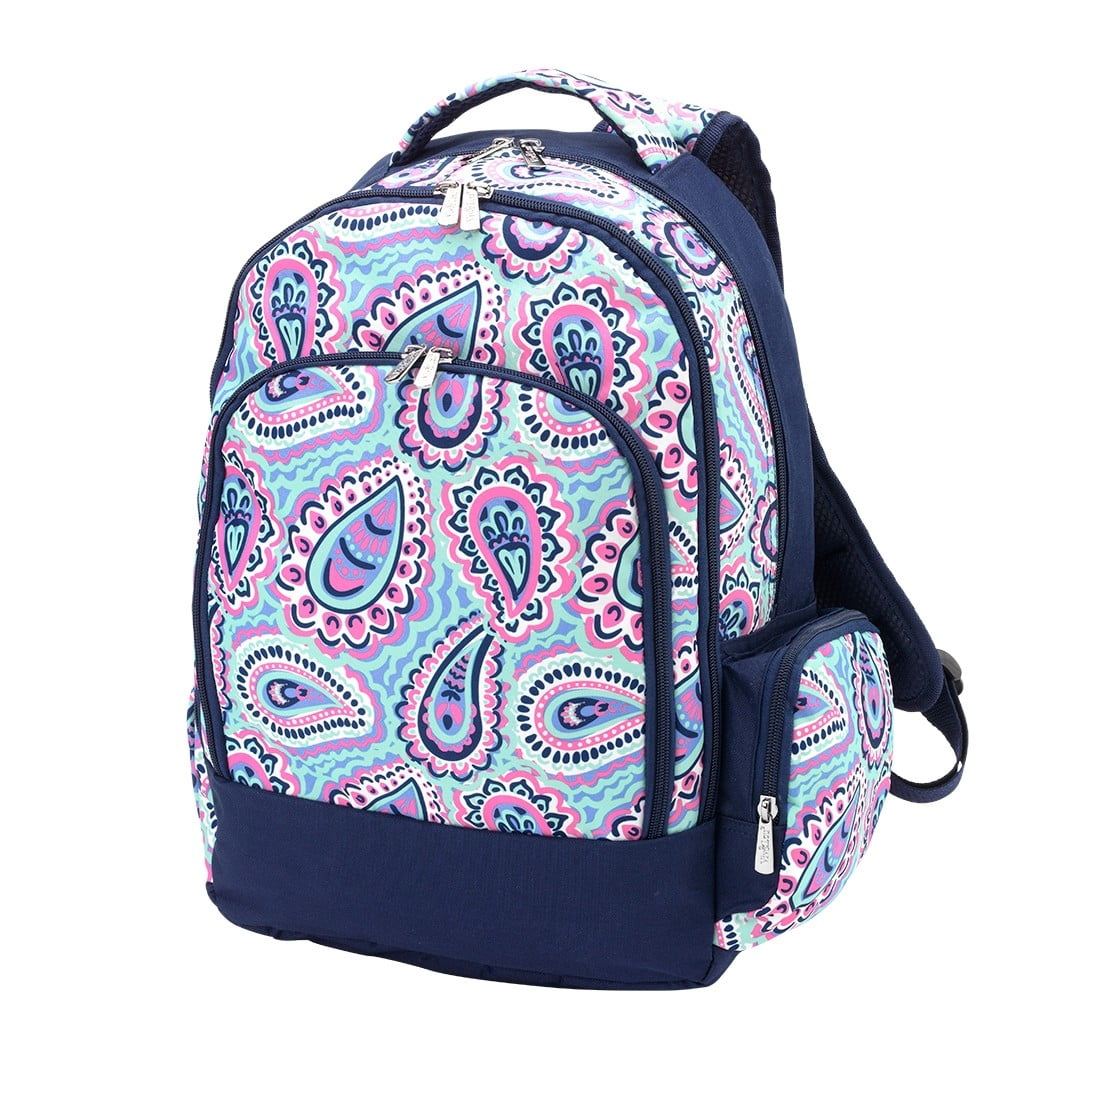 Backpack Embroidery Blanks - SOPHIE - CLOSEOUT